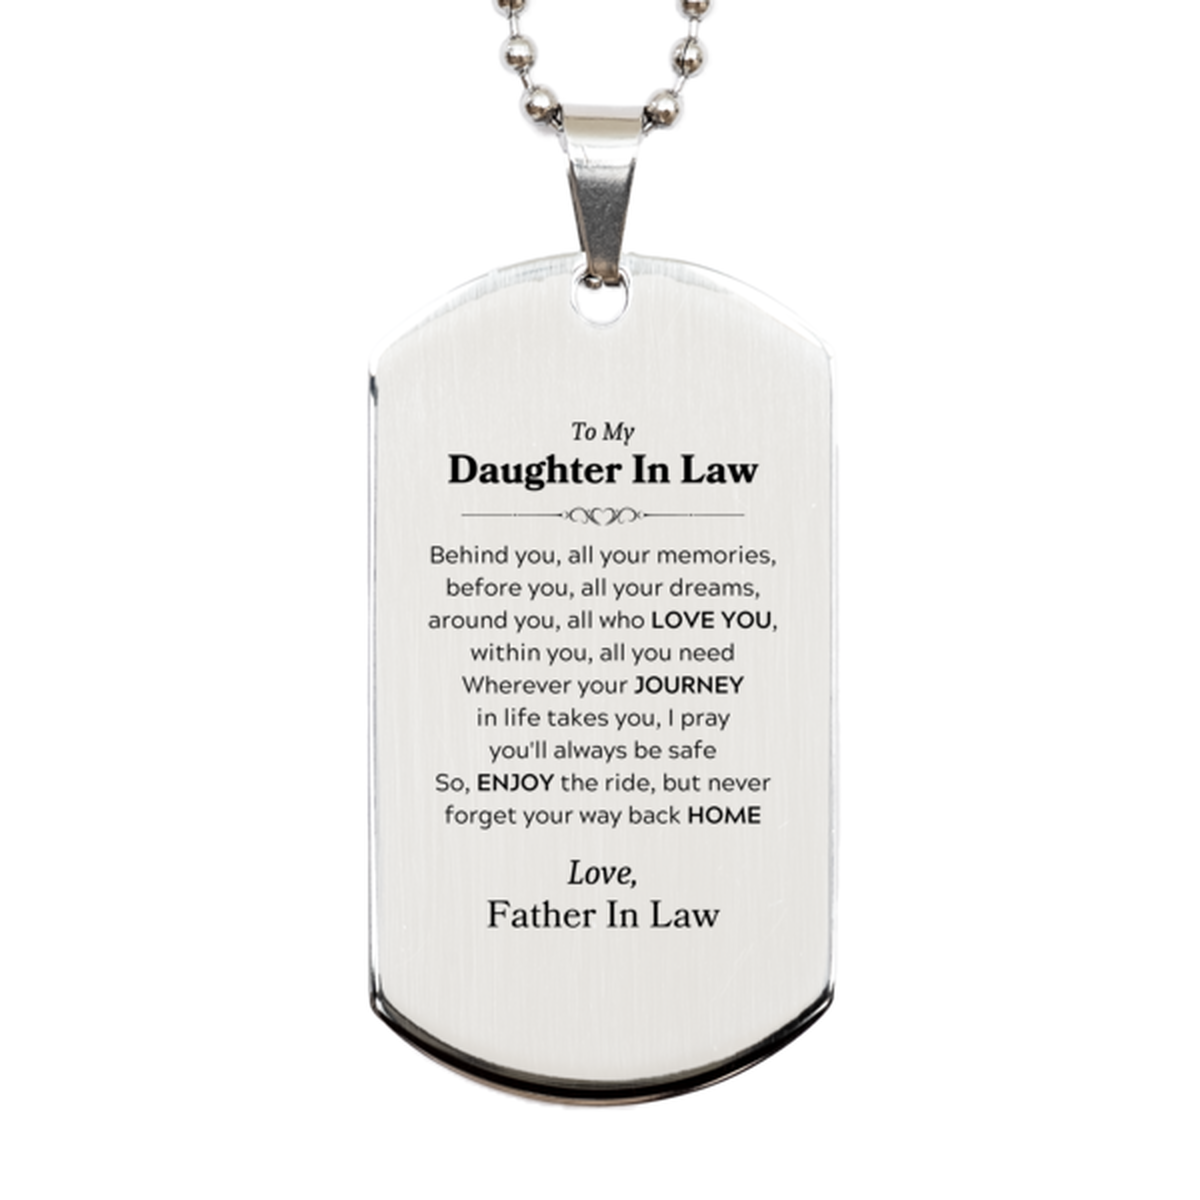 To My Daughter In Law Graduation Gifts from Father In Law, Daughter In Law Silver Dog Tag Christmas Birthday Gifts for Daughter In Law Behind you, all your memories, before you, all your dreams. Love, Father In Law